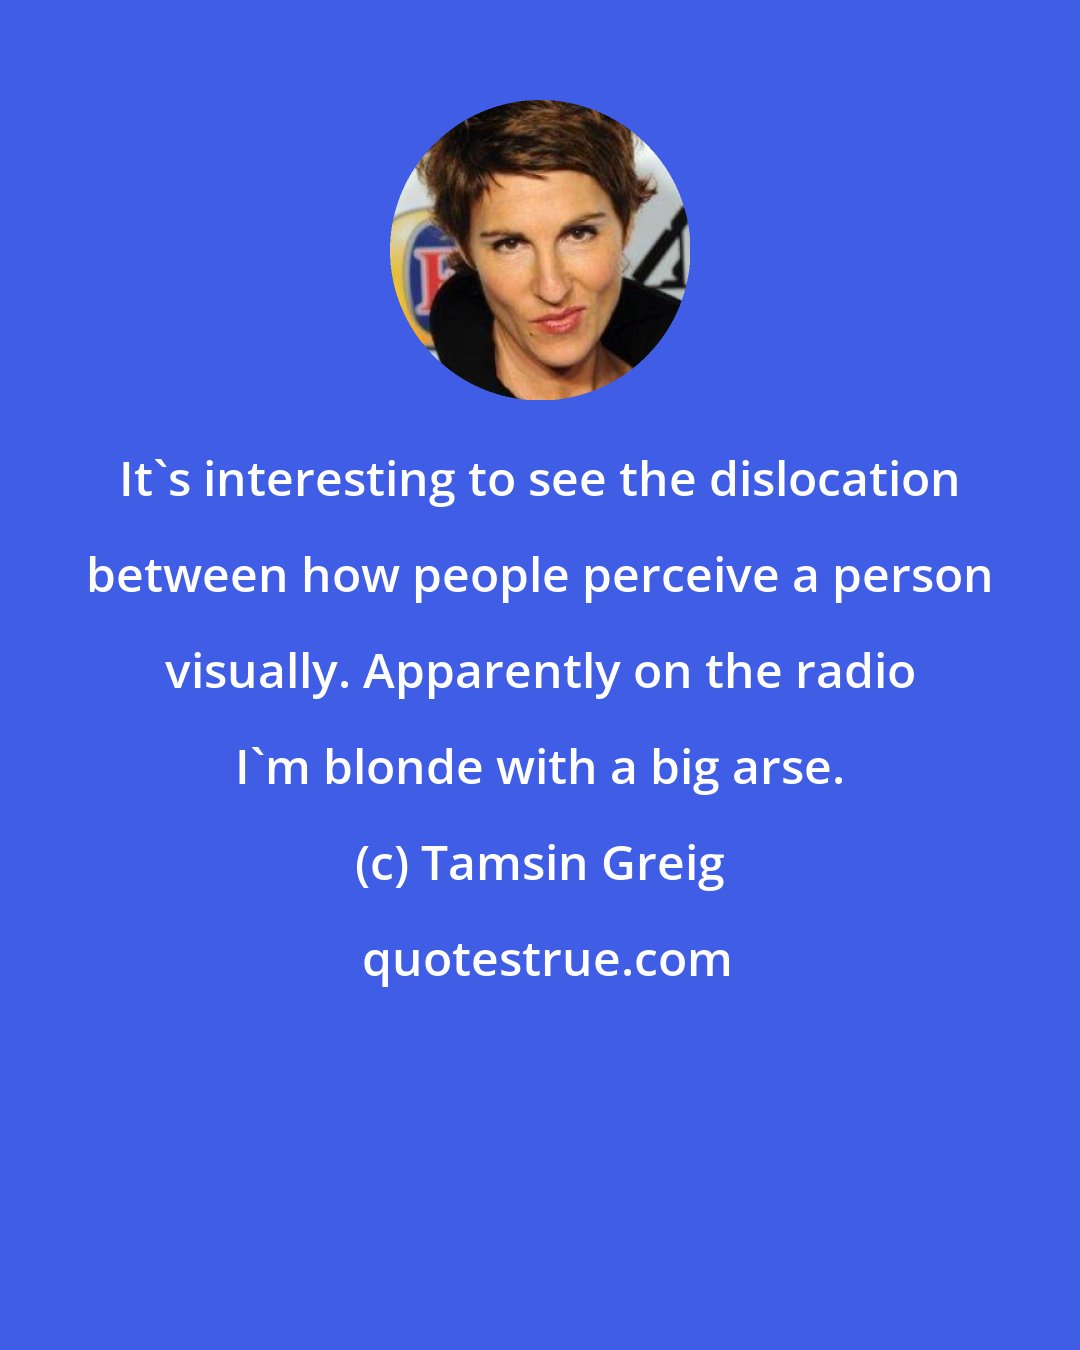 Tamsin Greig: It's interesting to see the dislocation between how people perceive a person visually. Apparently on the radio I'm blonde with a big arse.